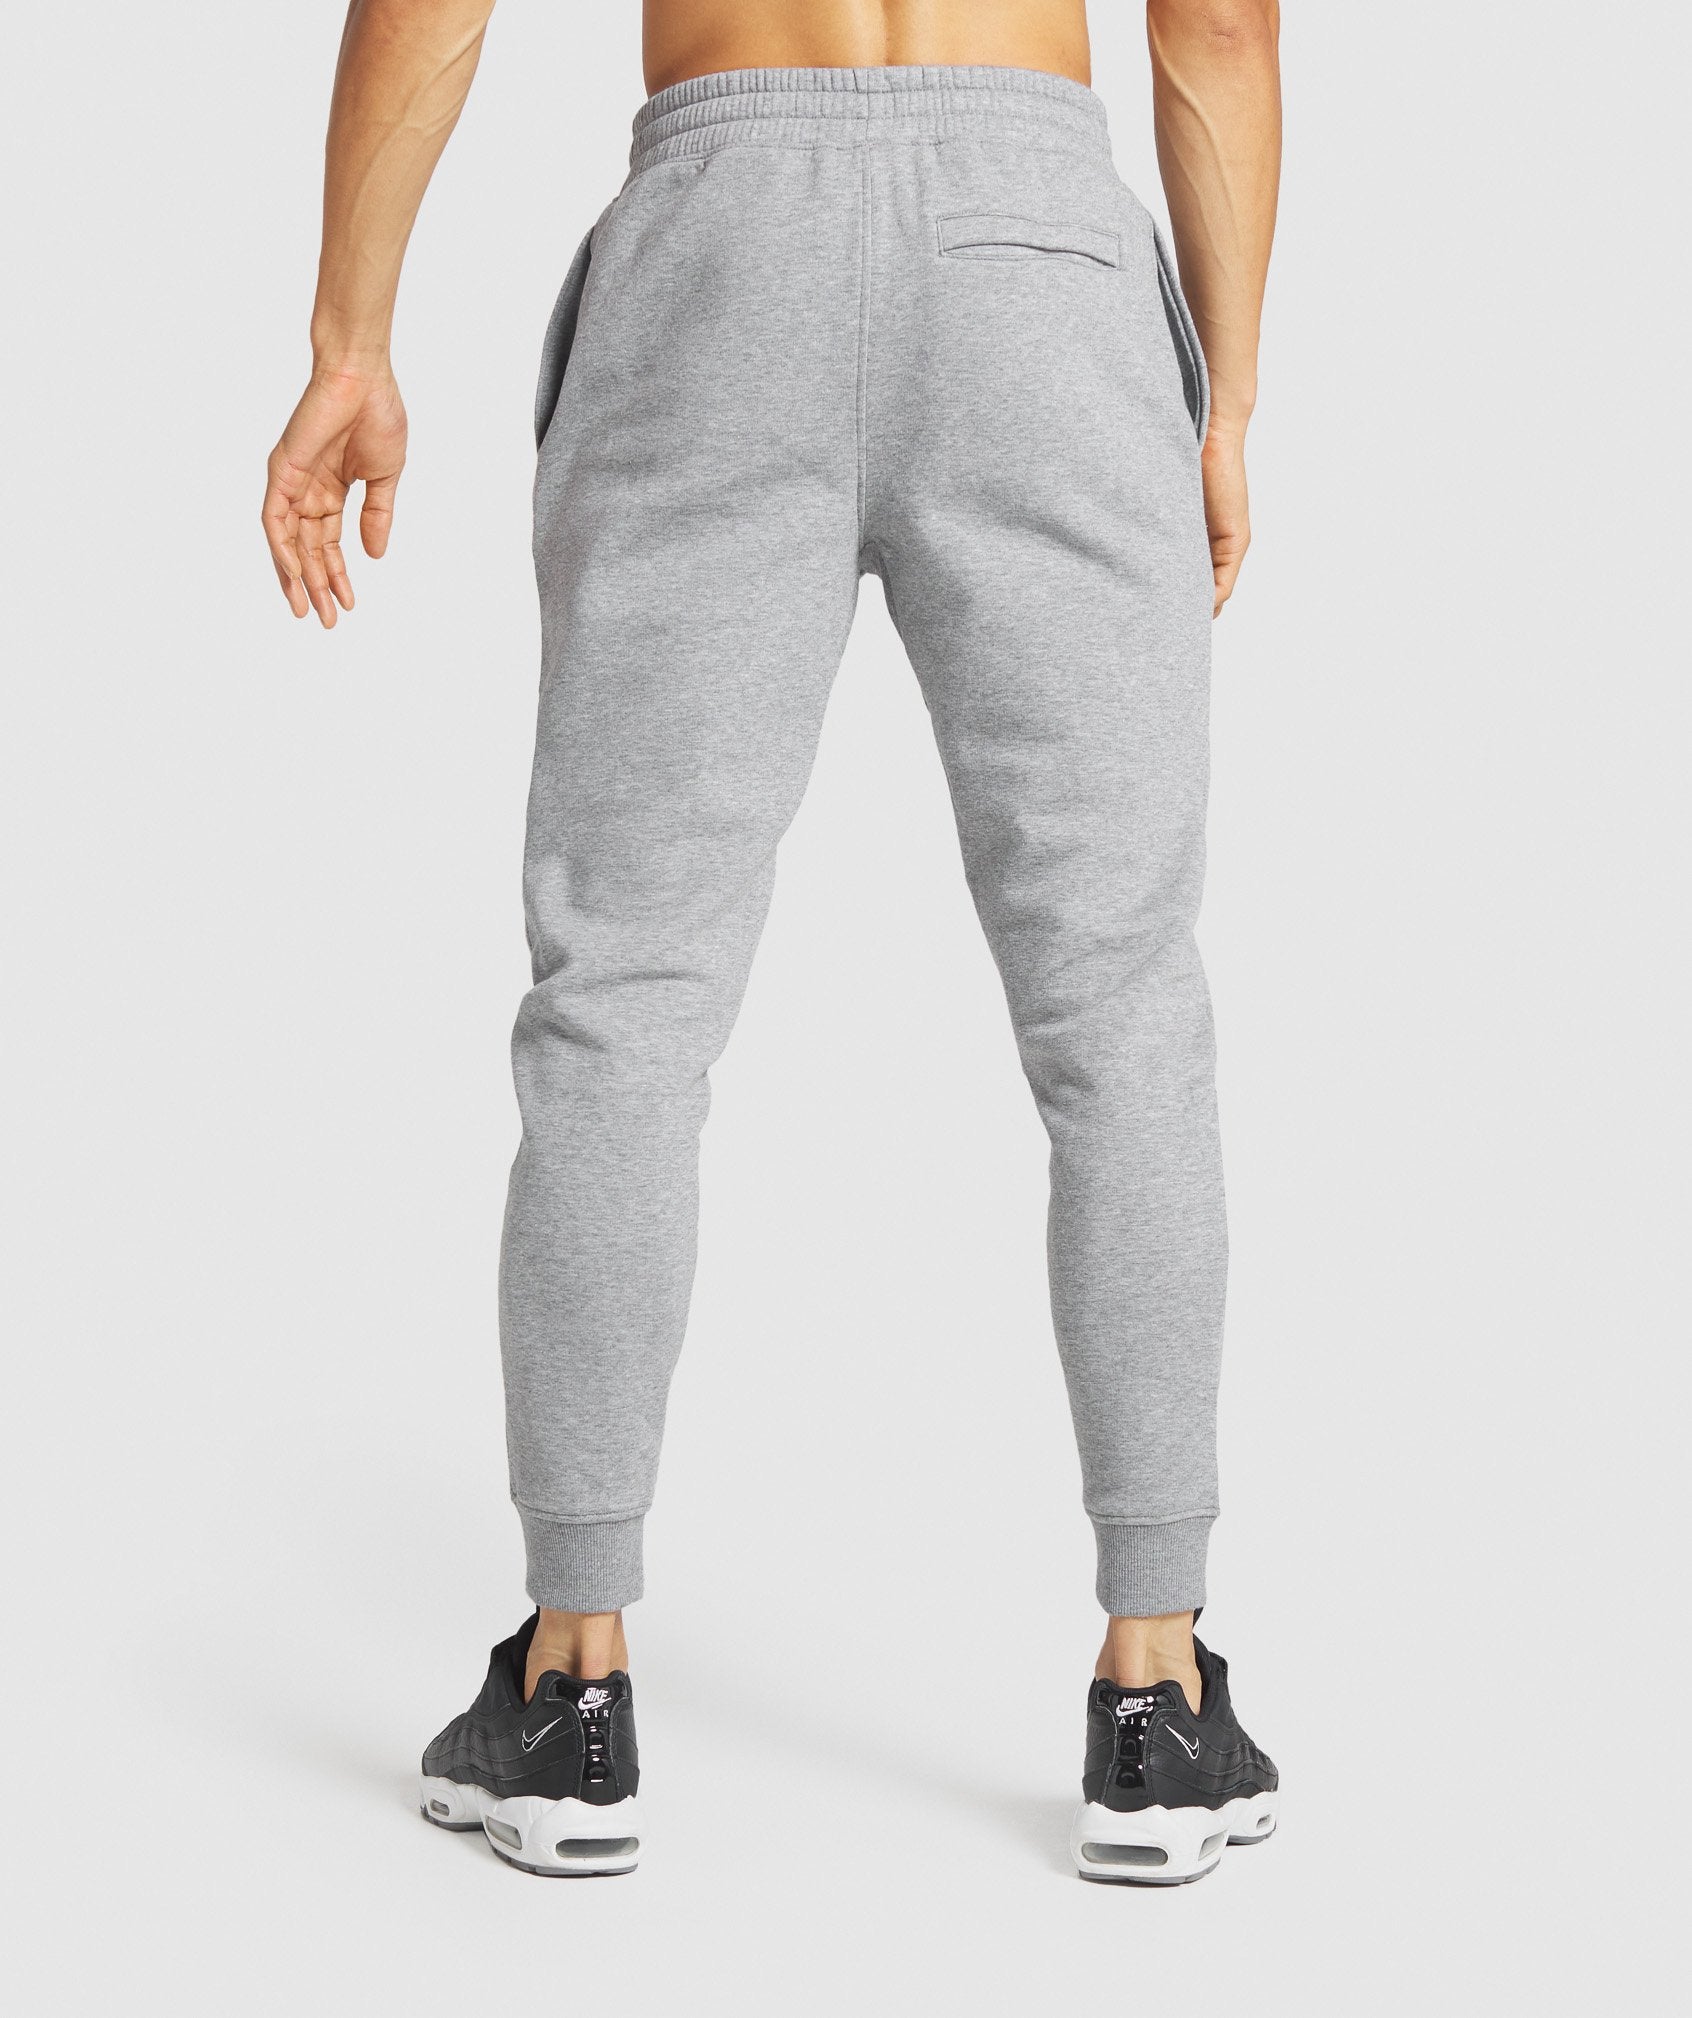 Crest Joggers in Charcoal Marl - view 3